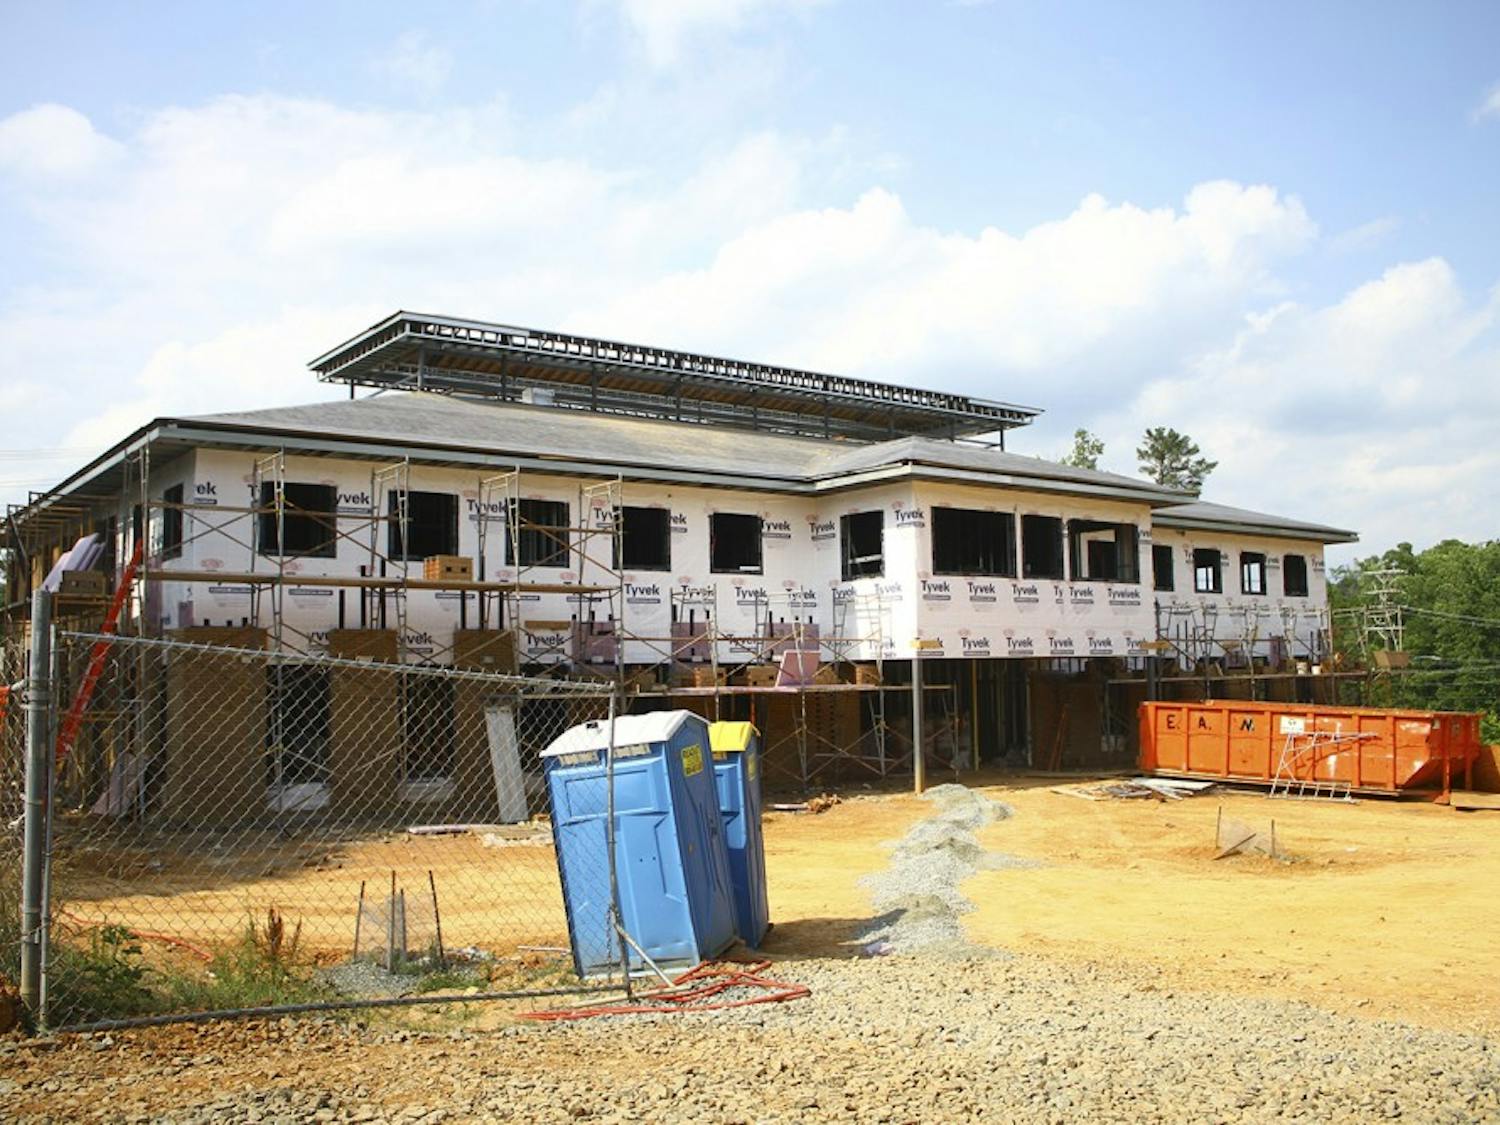 Construction continues on the Chapel Hill-Carrboro Inter-Faith Council for Social Services’ men’s homeless shelter and community kitchen’s new location.